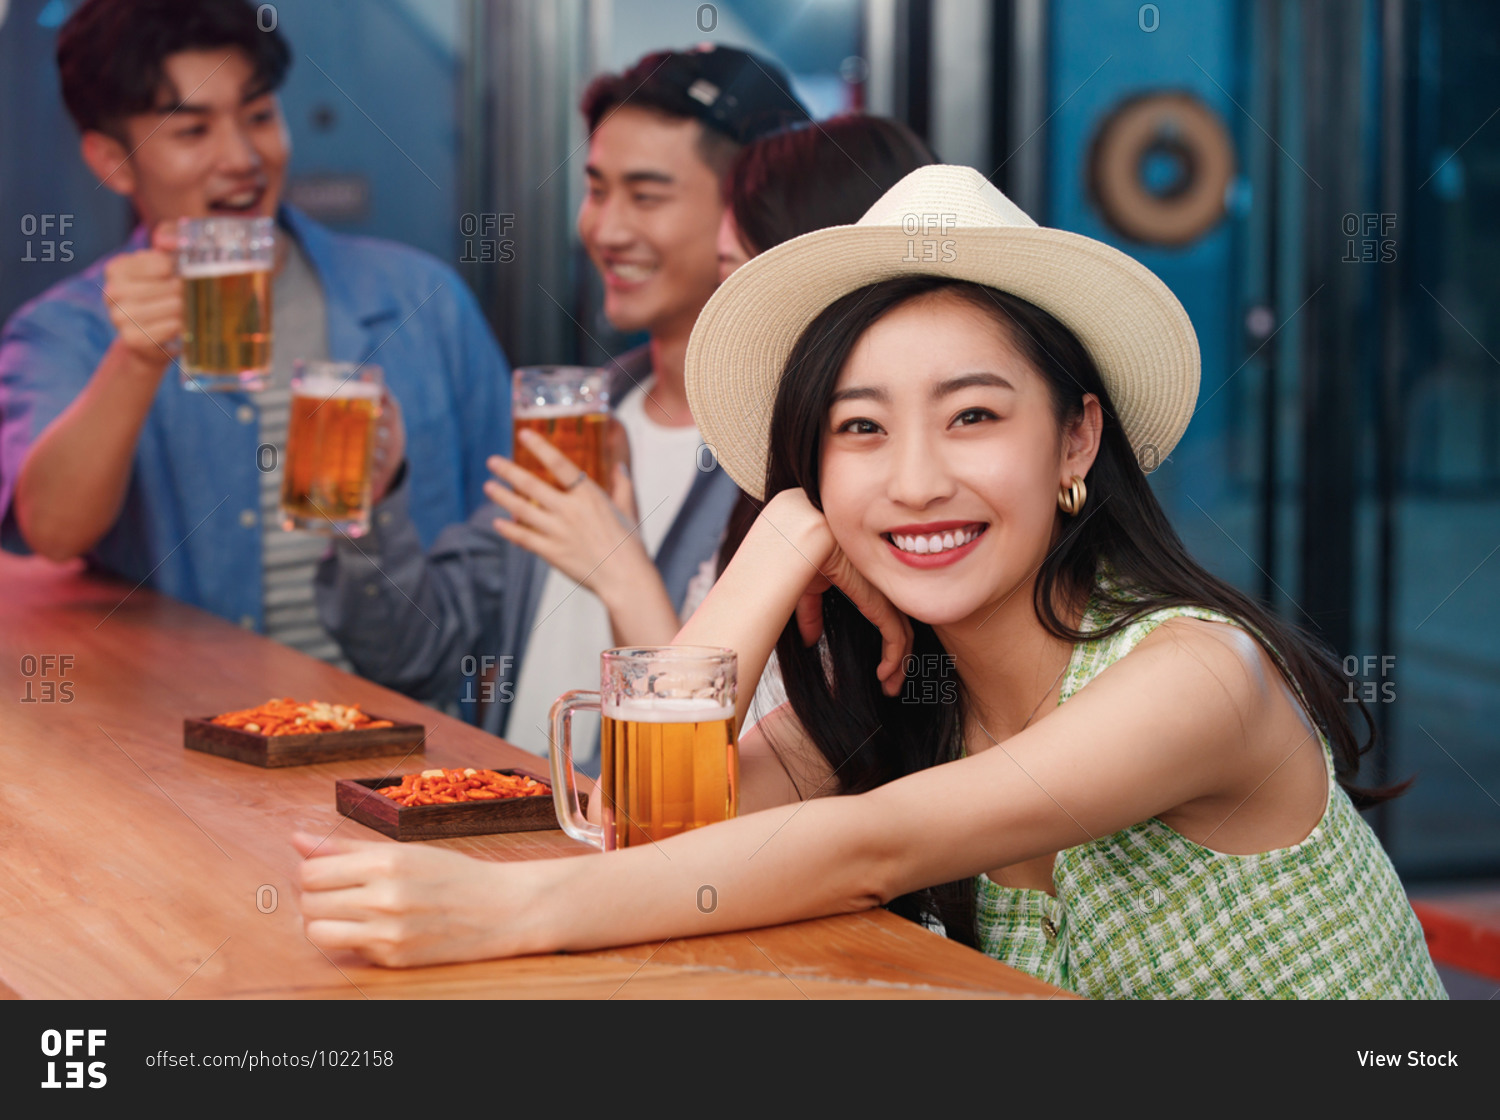 Young women drinking with friends in a bar